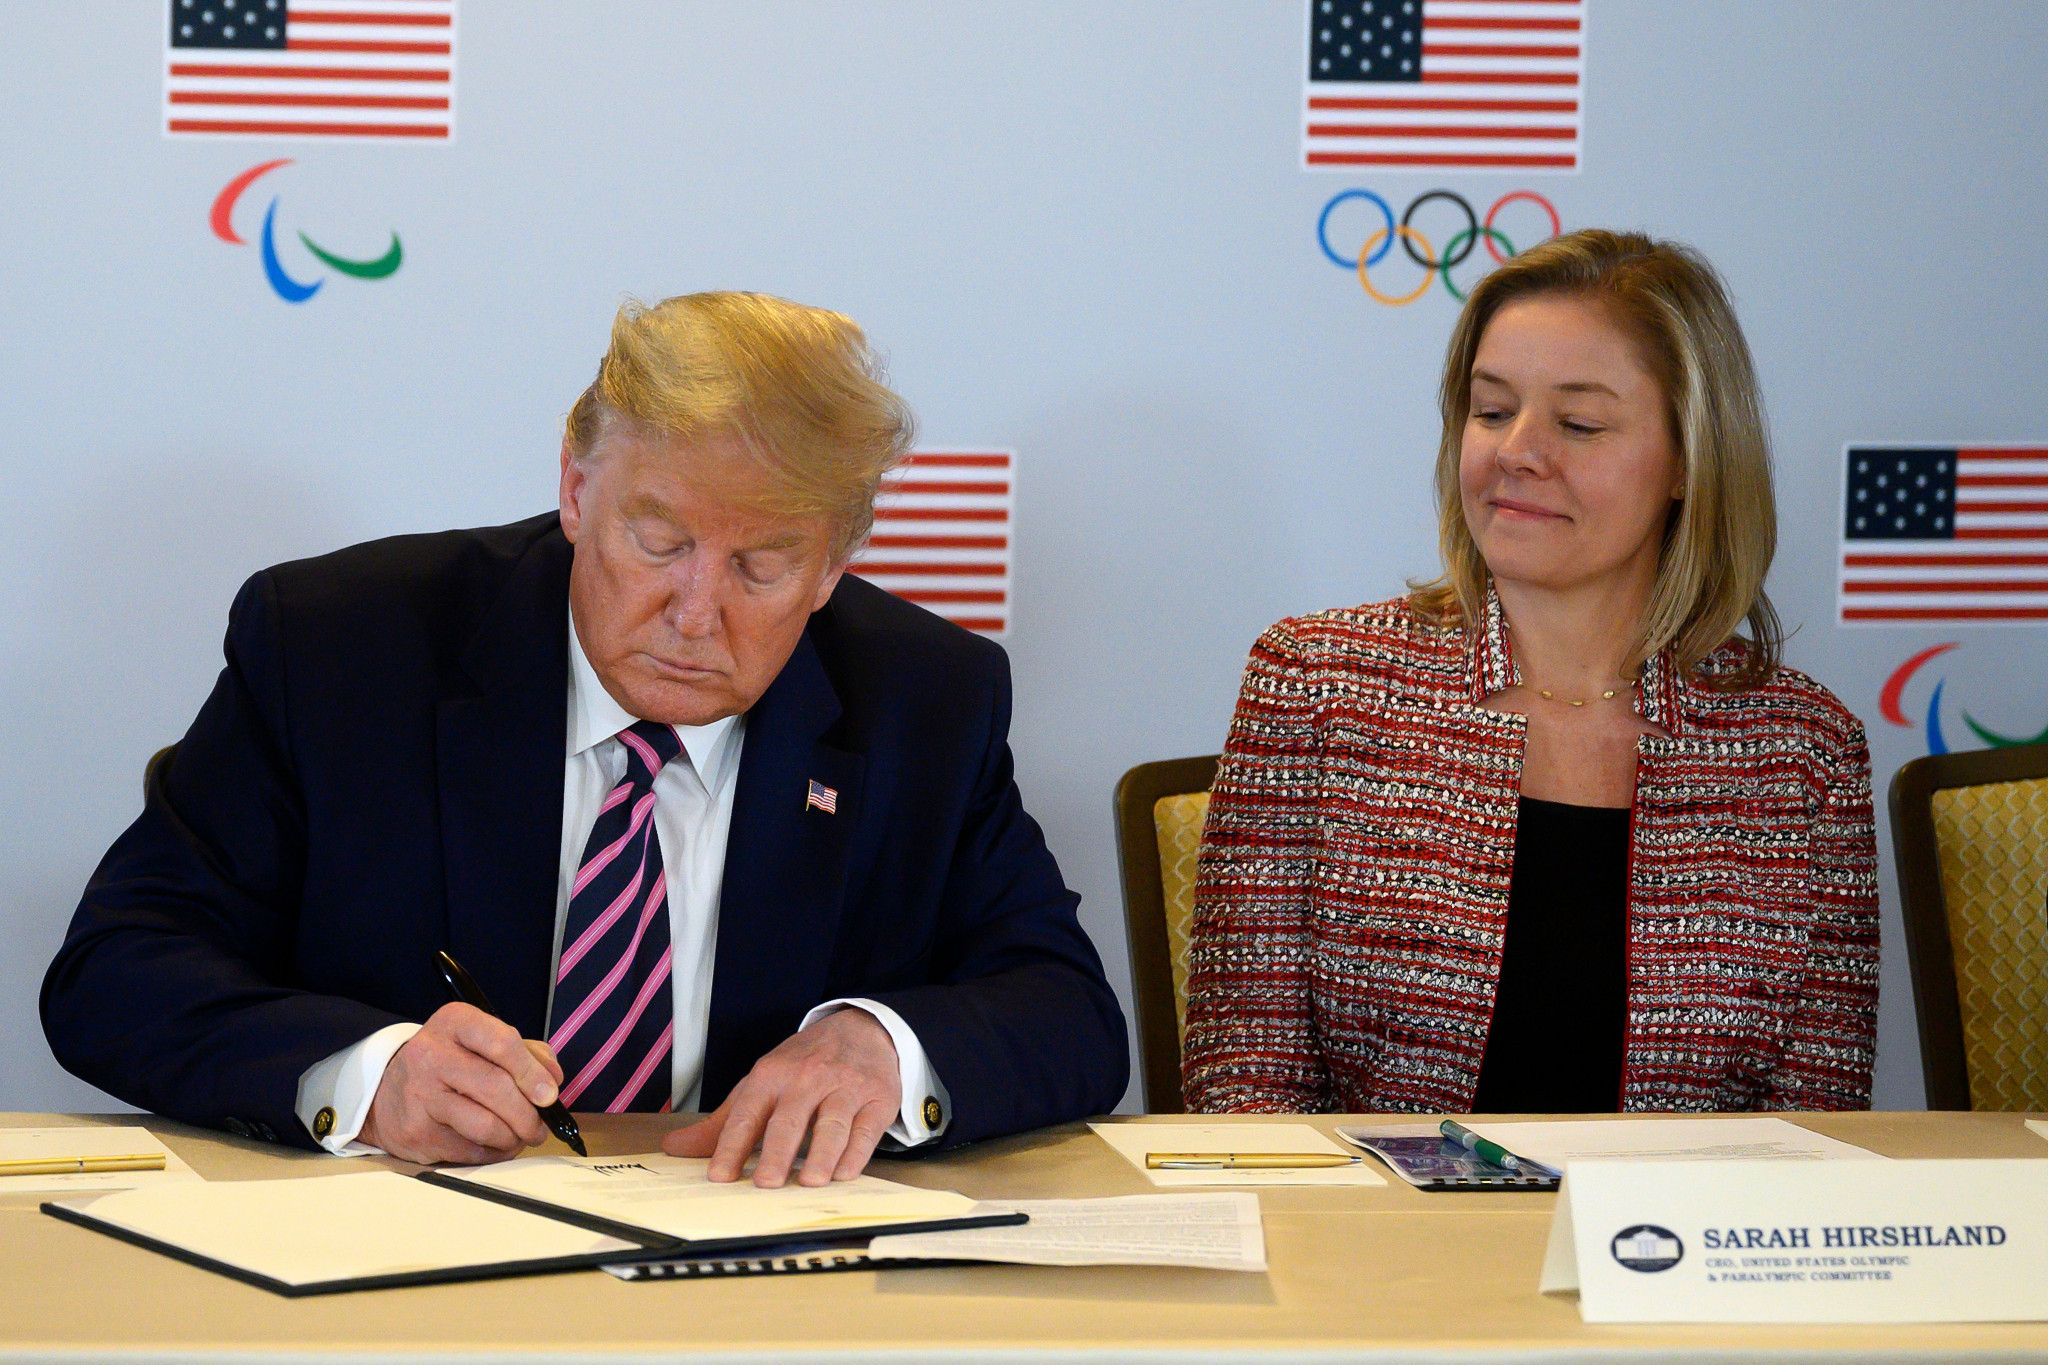 Trump confirms US Government support for Los Angeles 2028